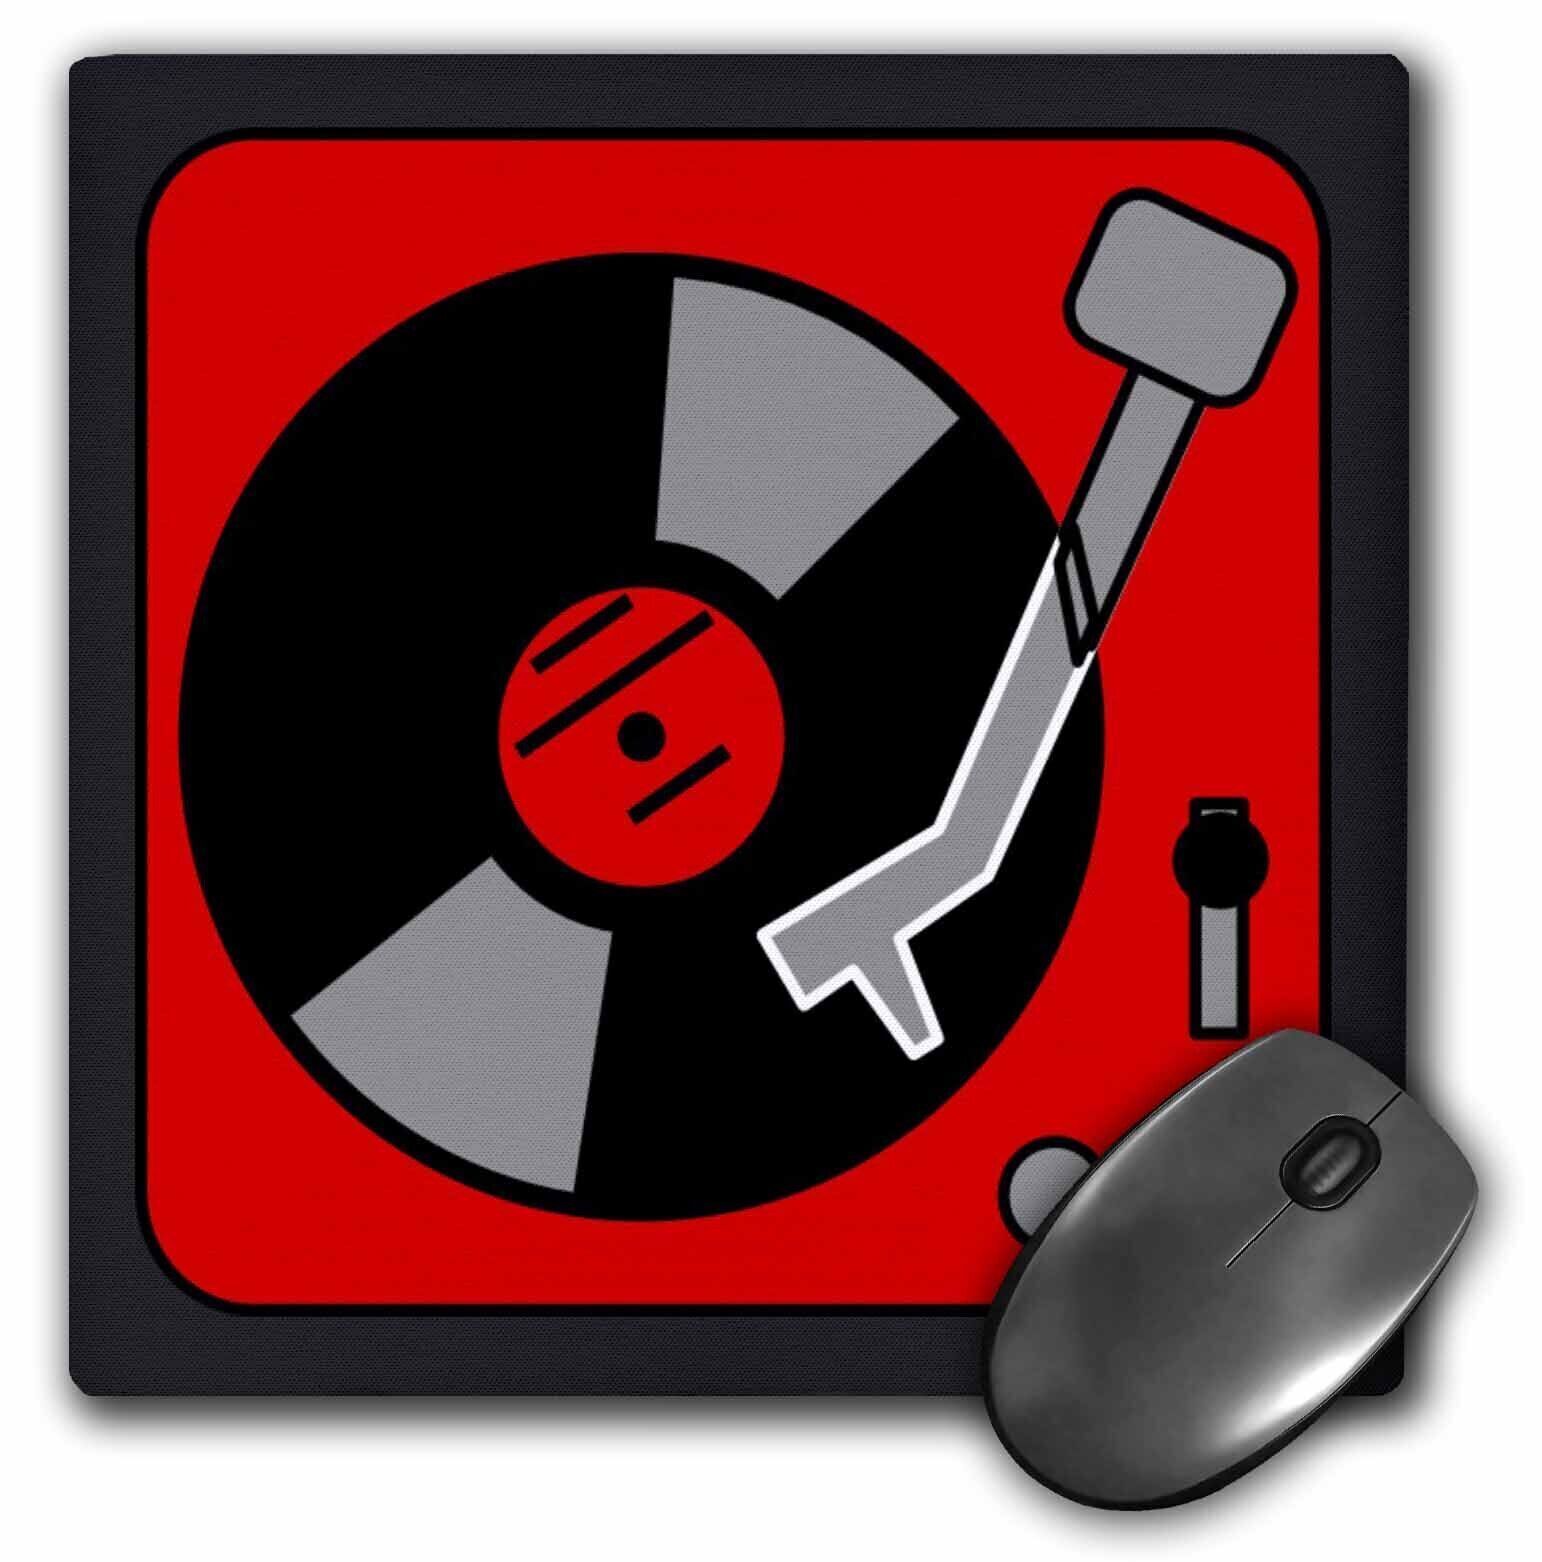 3dRose Retro Red and Black Record Player MousePad